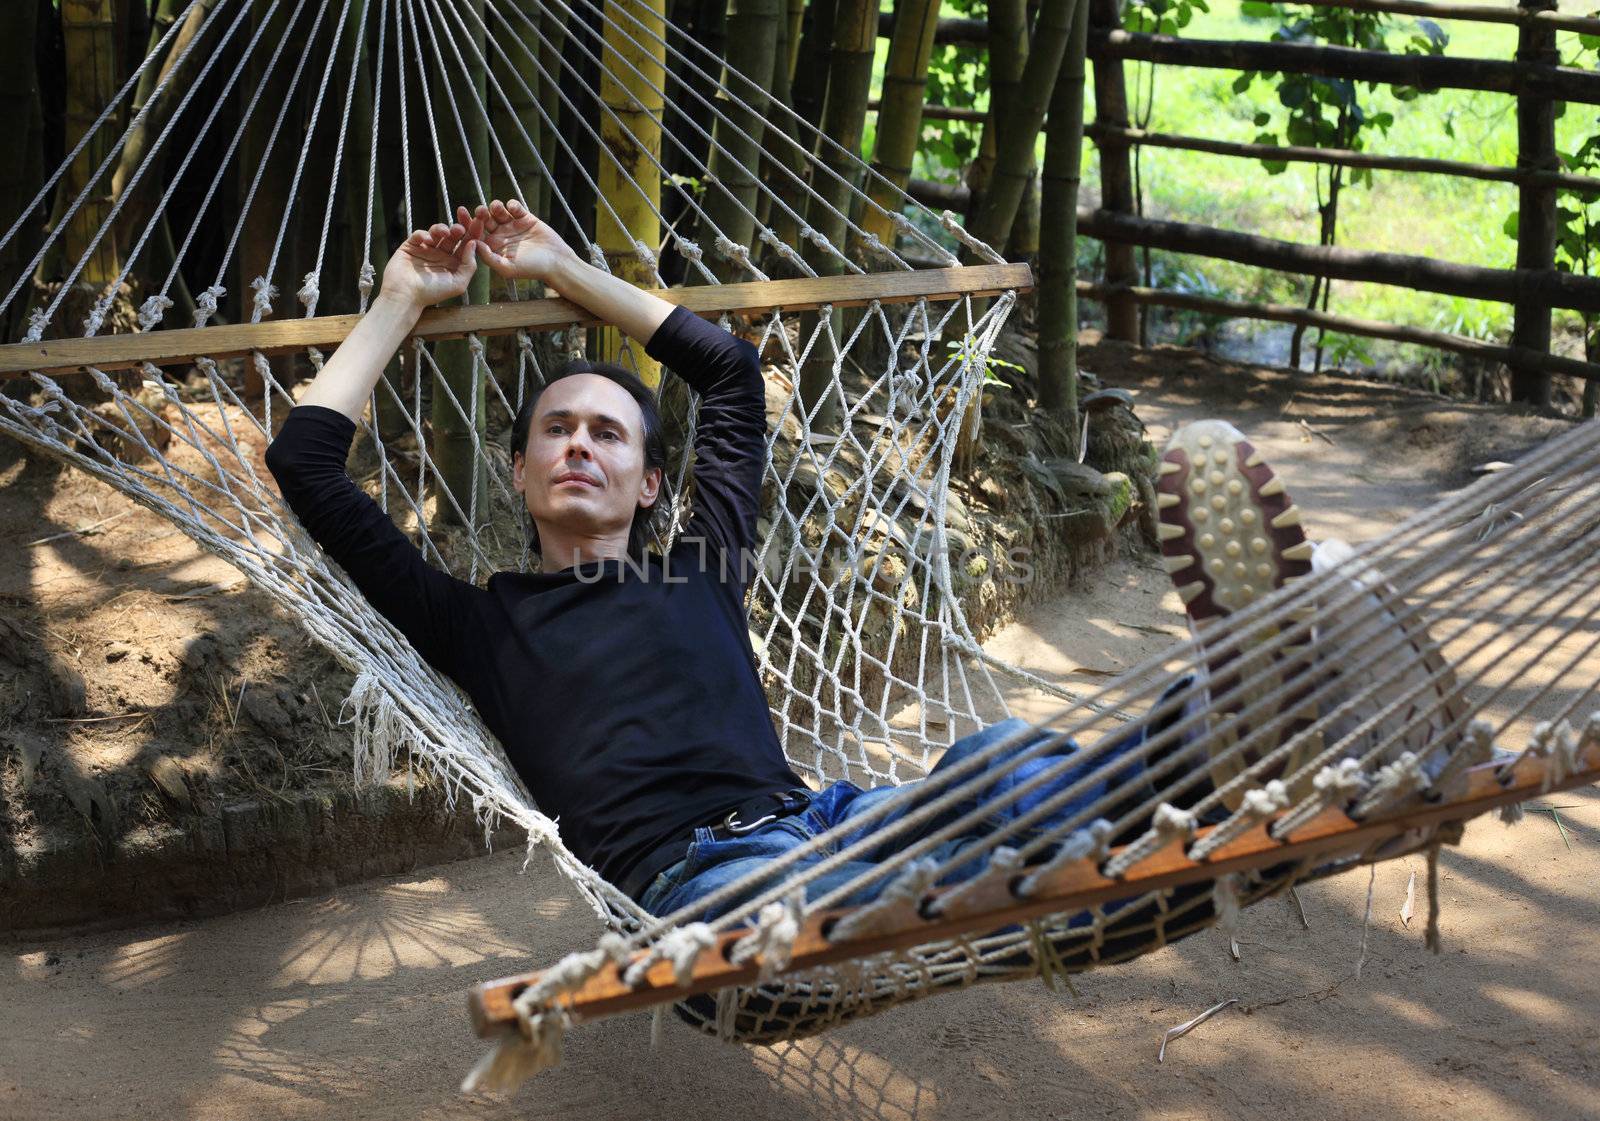 The man relaxs in a hammock